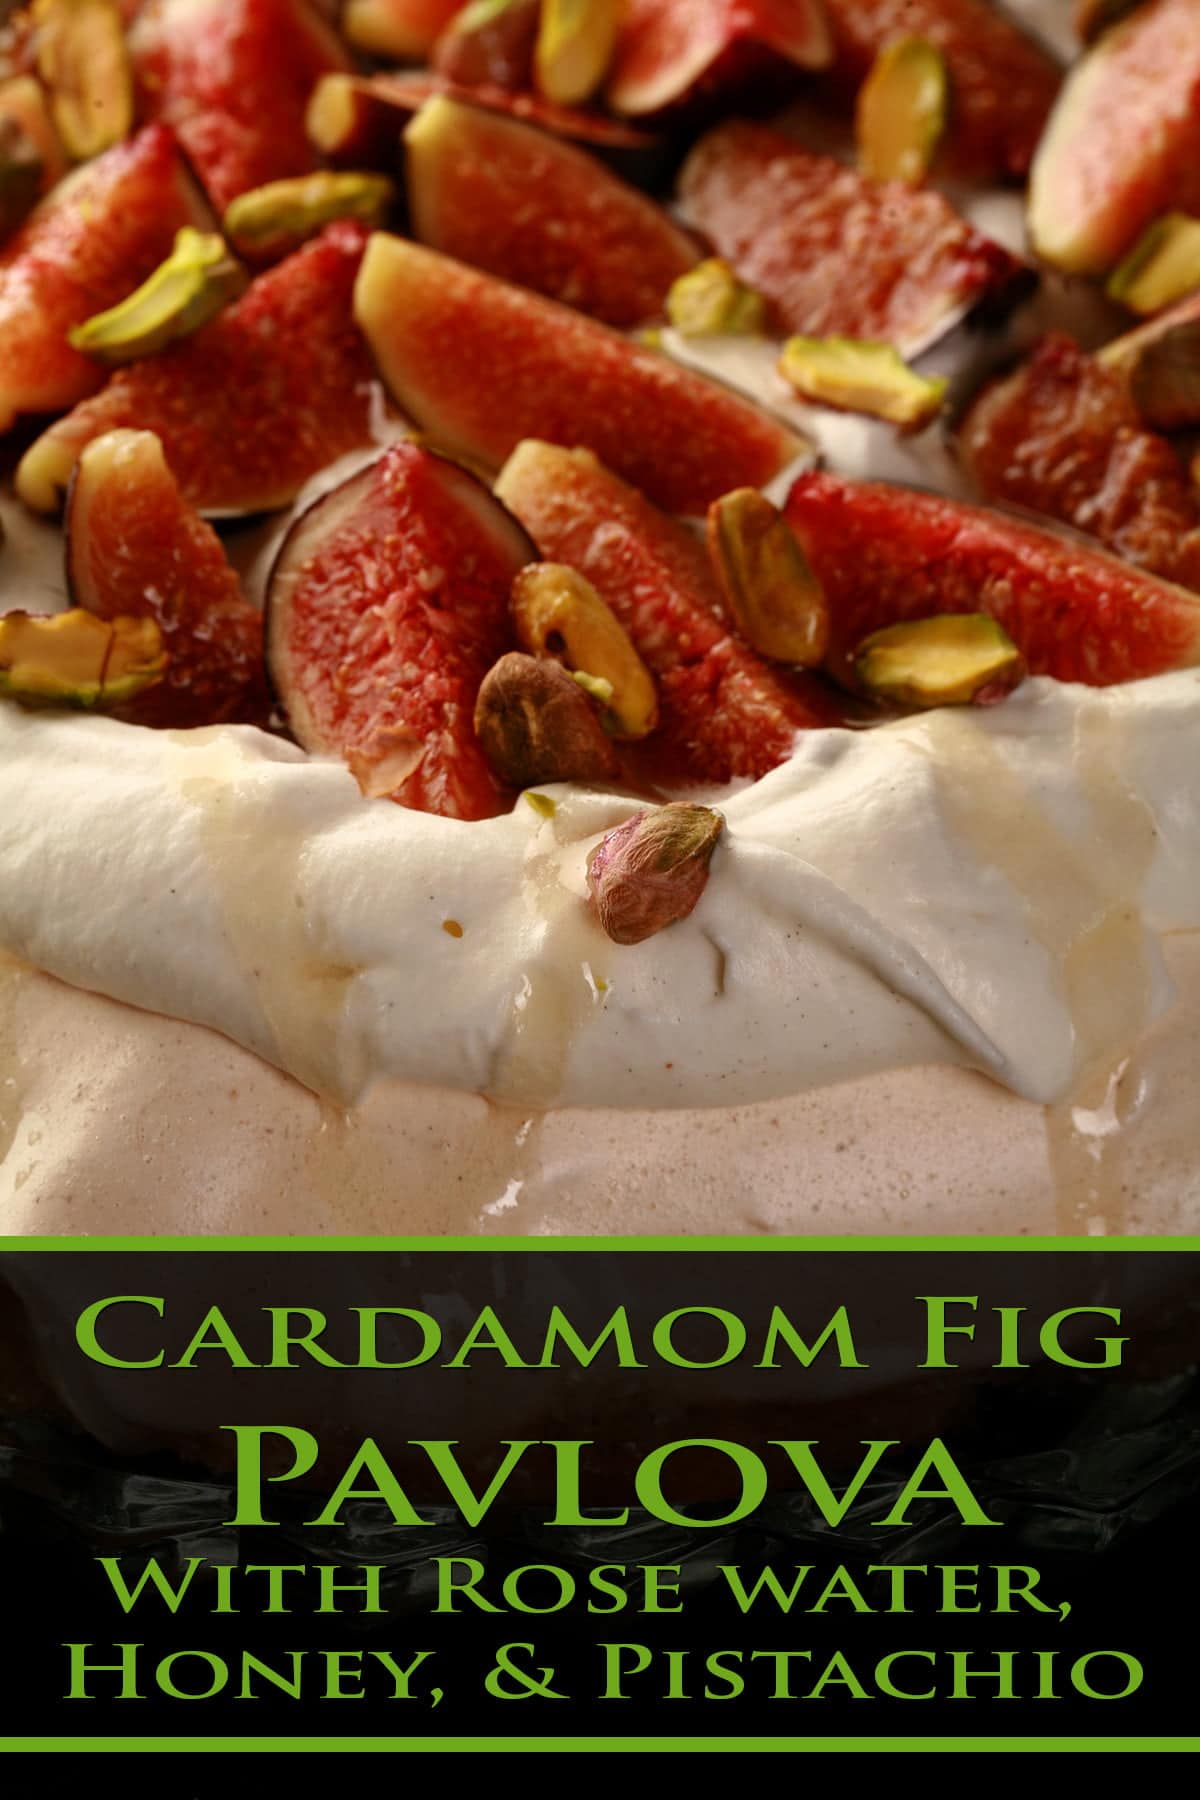 An ivory coloured Pavlova meringue round, piled with whipped cream, sliced figs, and pistachios. A drizzle of honey finishes it off. A Cardamom fig pavlova.